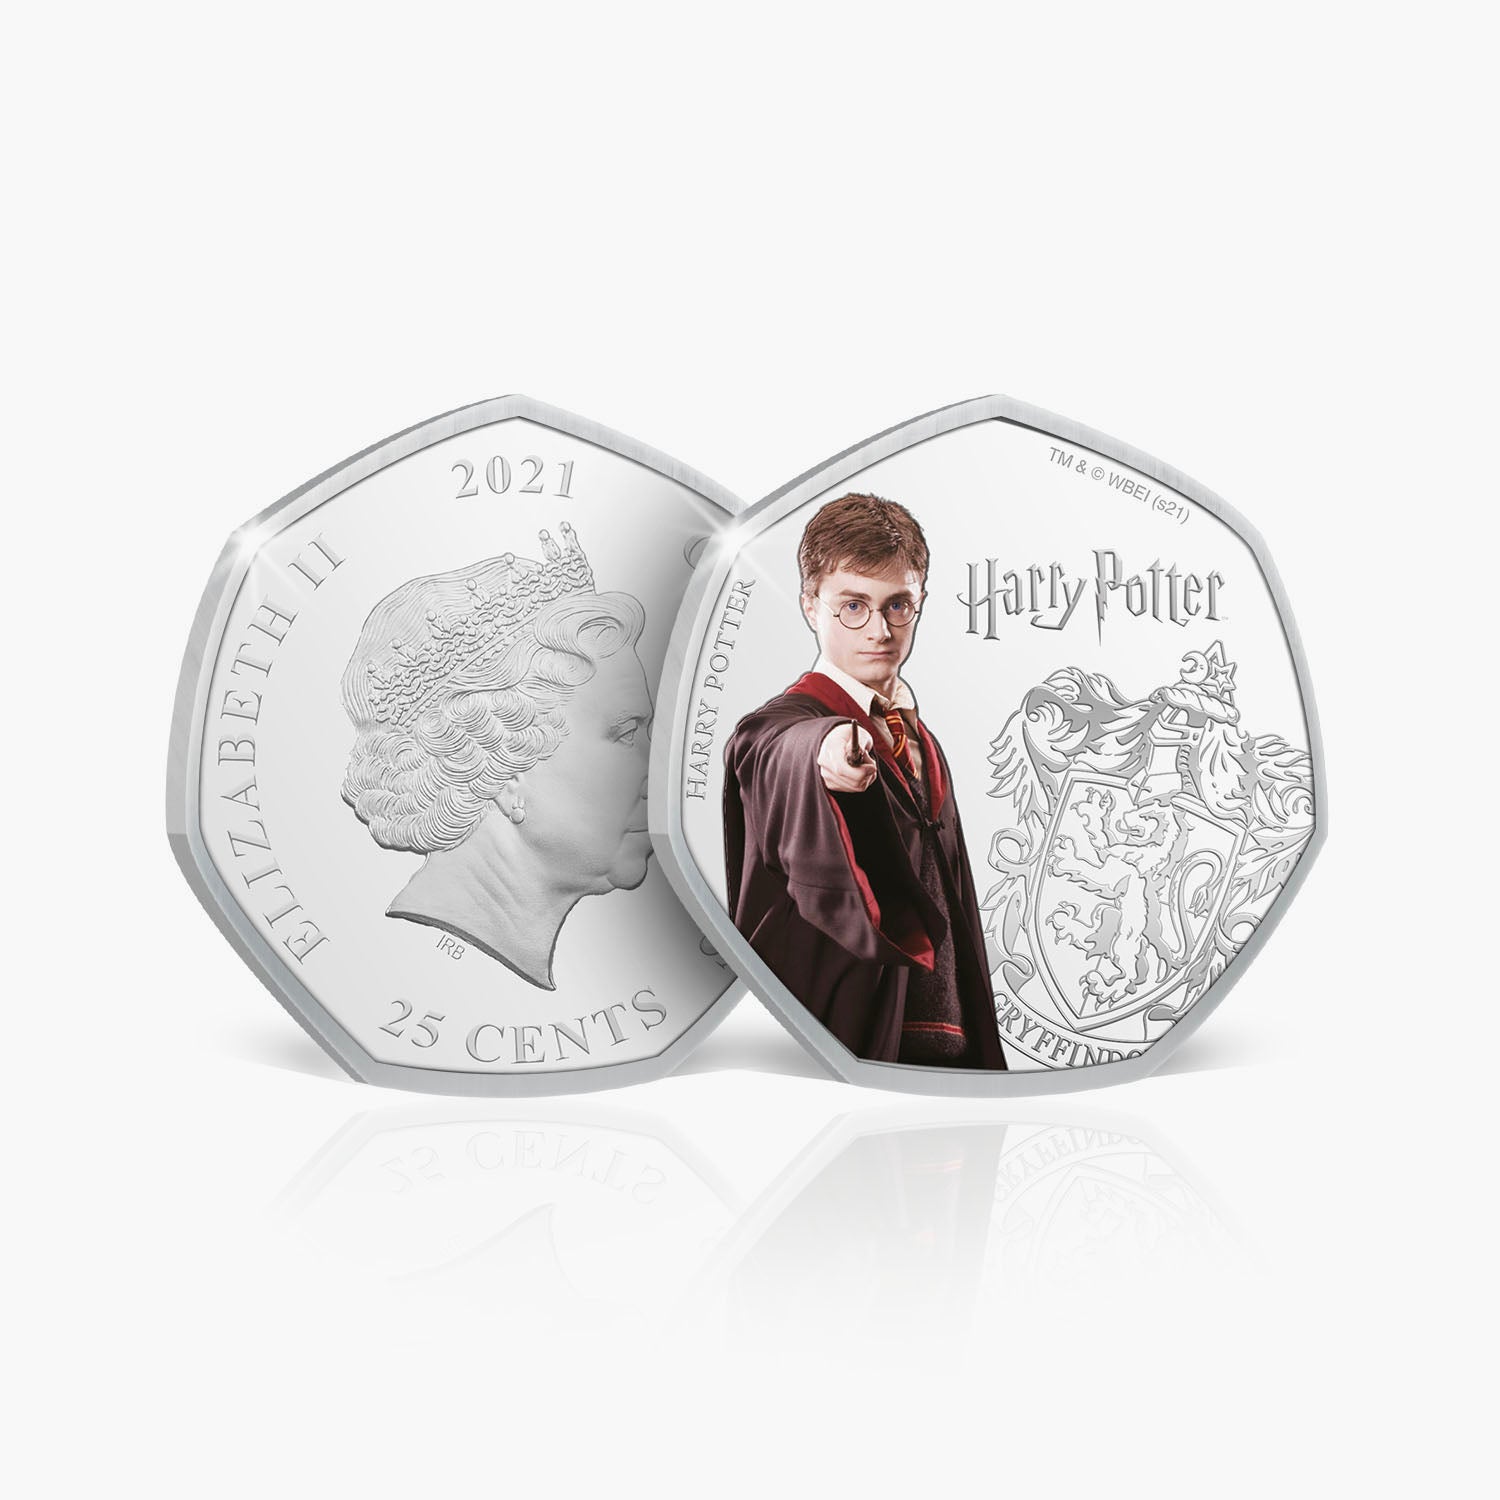 Harry Potter Silver Plated Coin with Colour